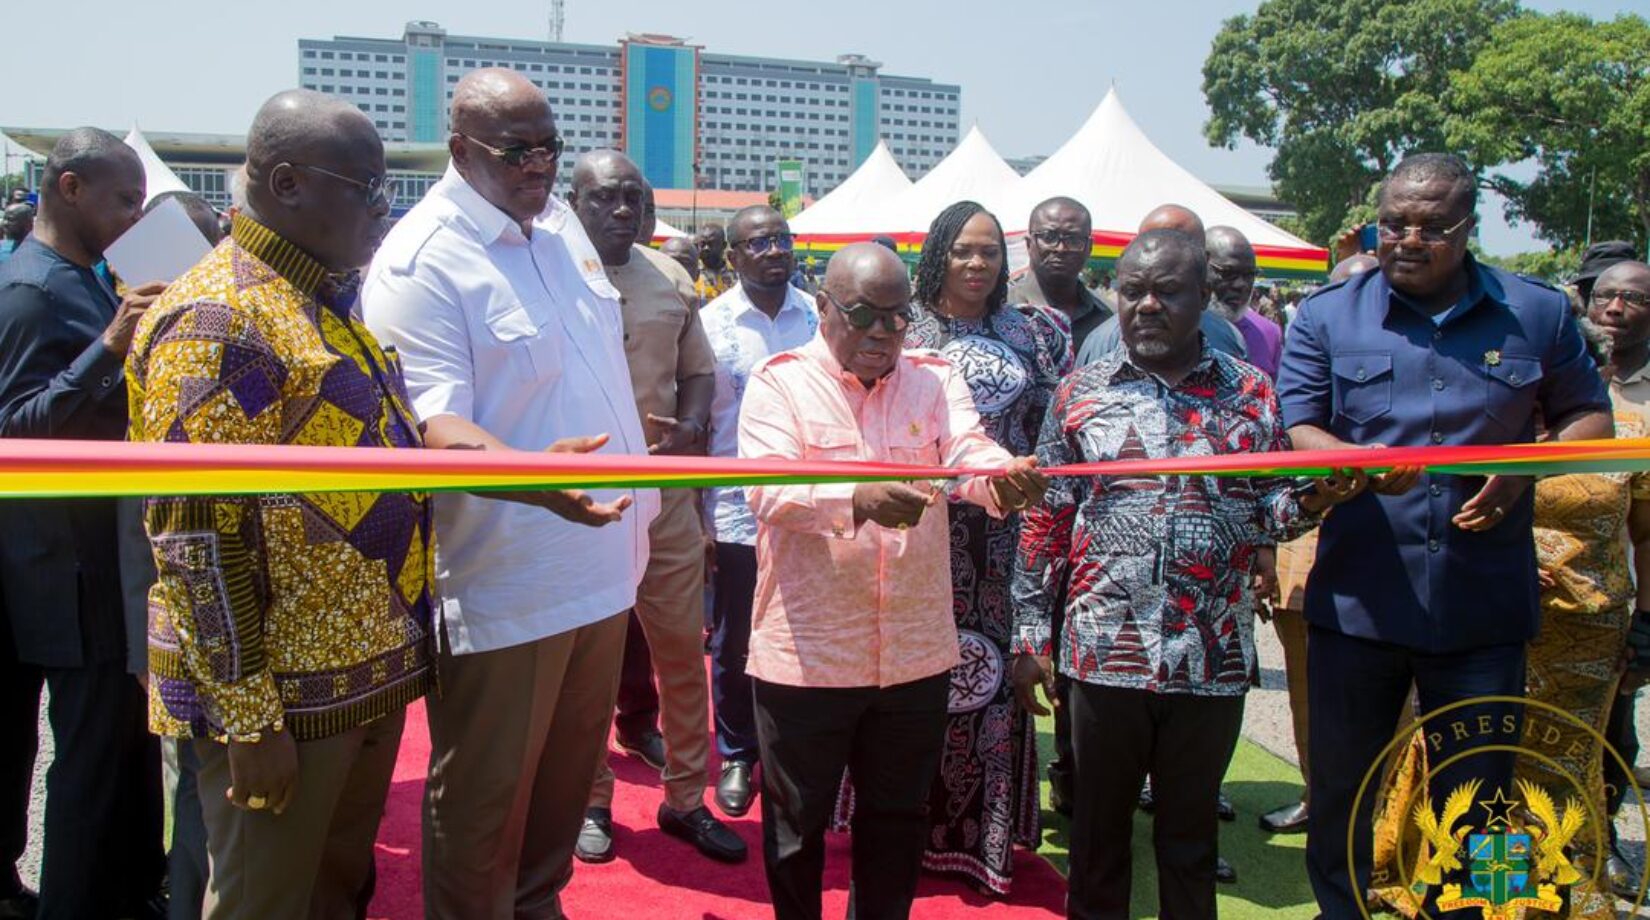 PRES. AKUFO-ADDO COMMISSIONS 45 METRO MASS BUSES